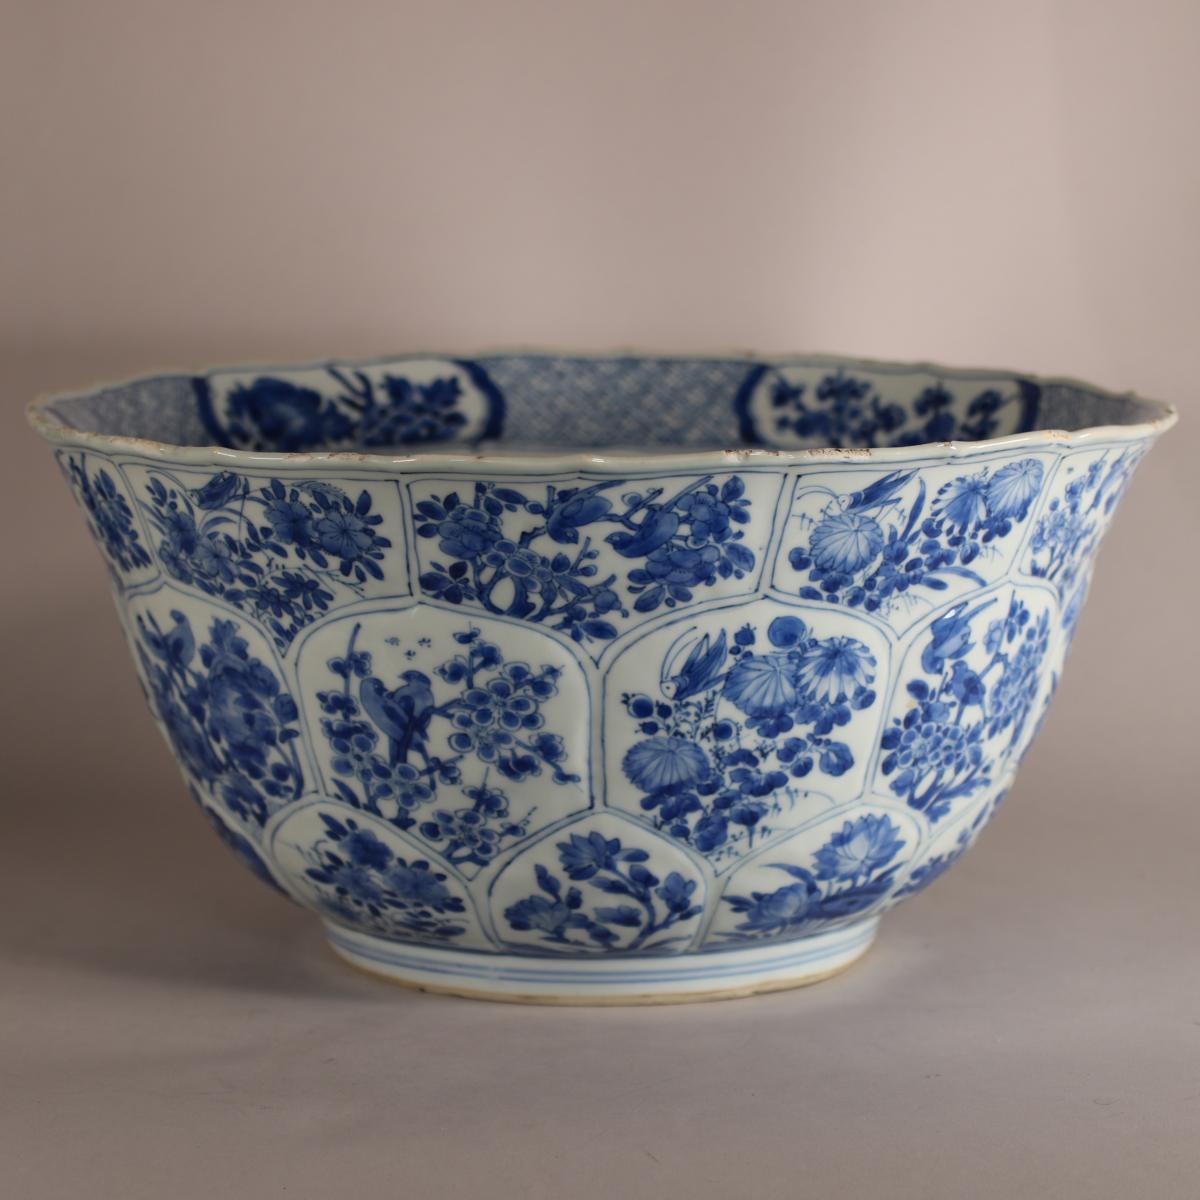 Alternative side of blue and white Kangxi Chinese bowl